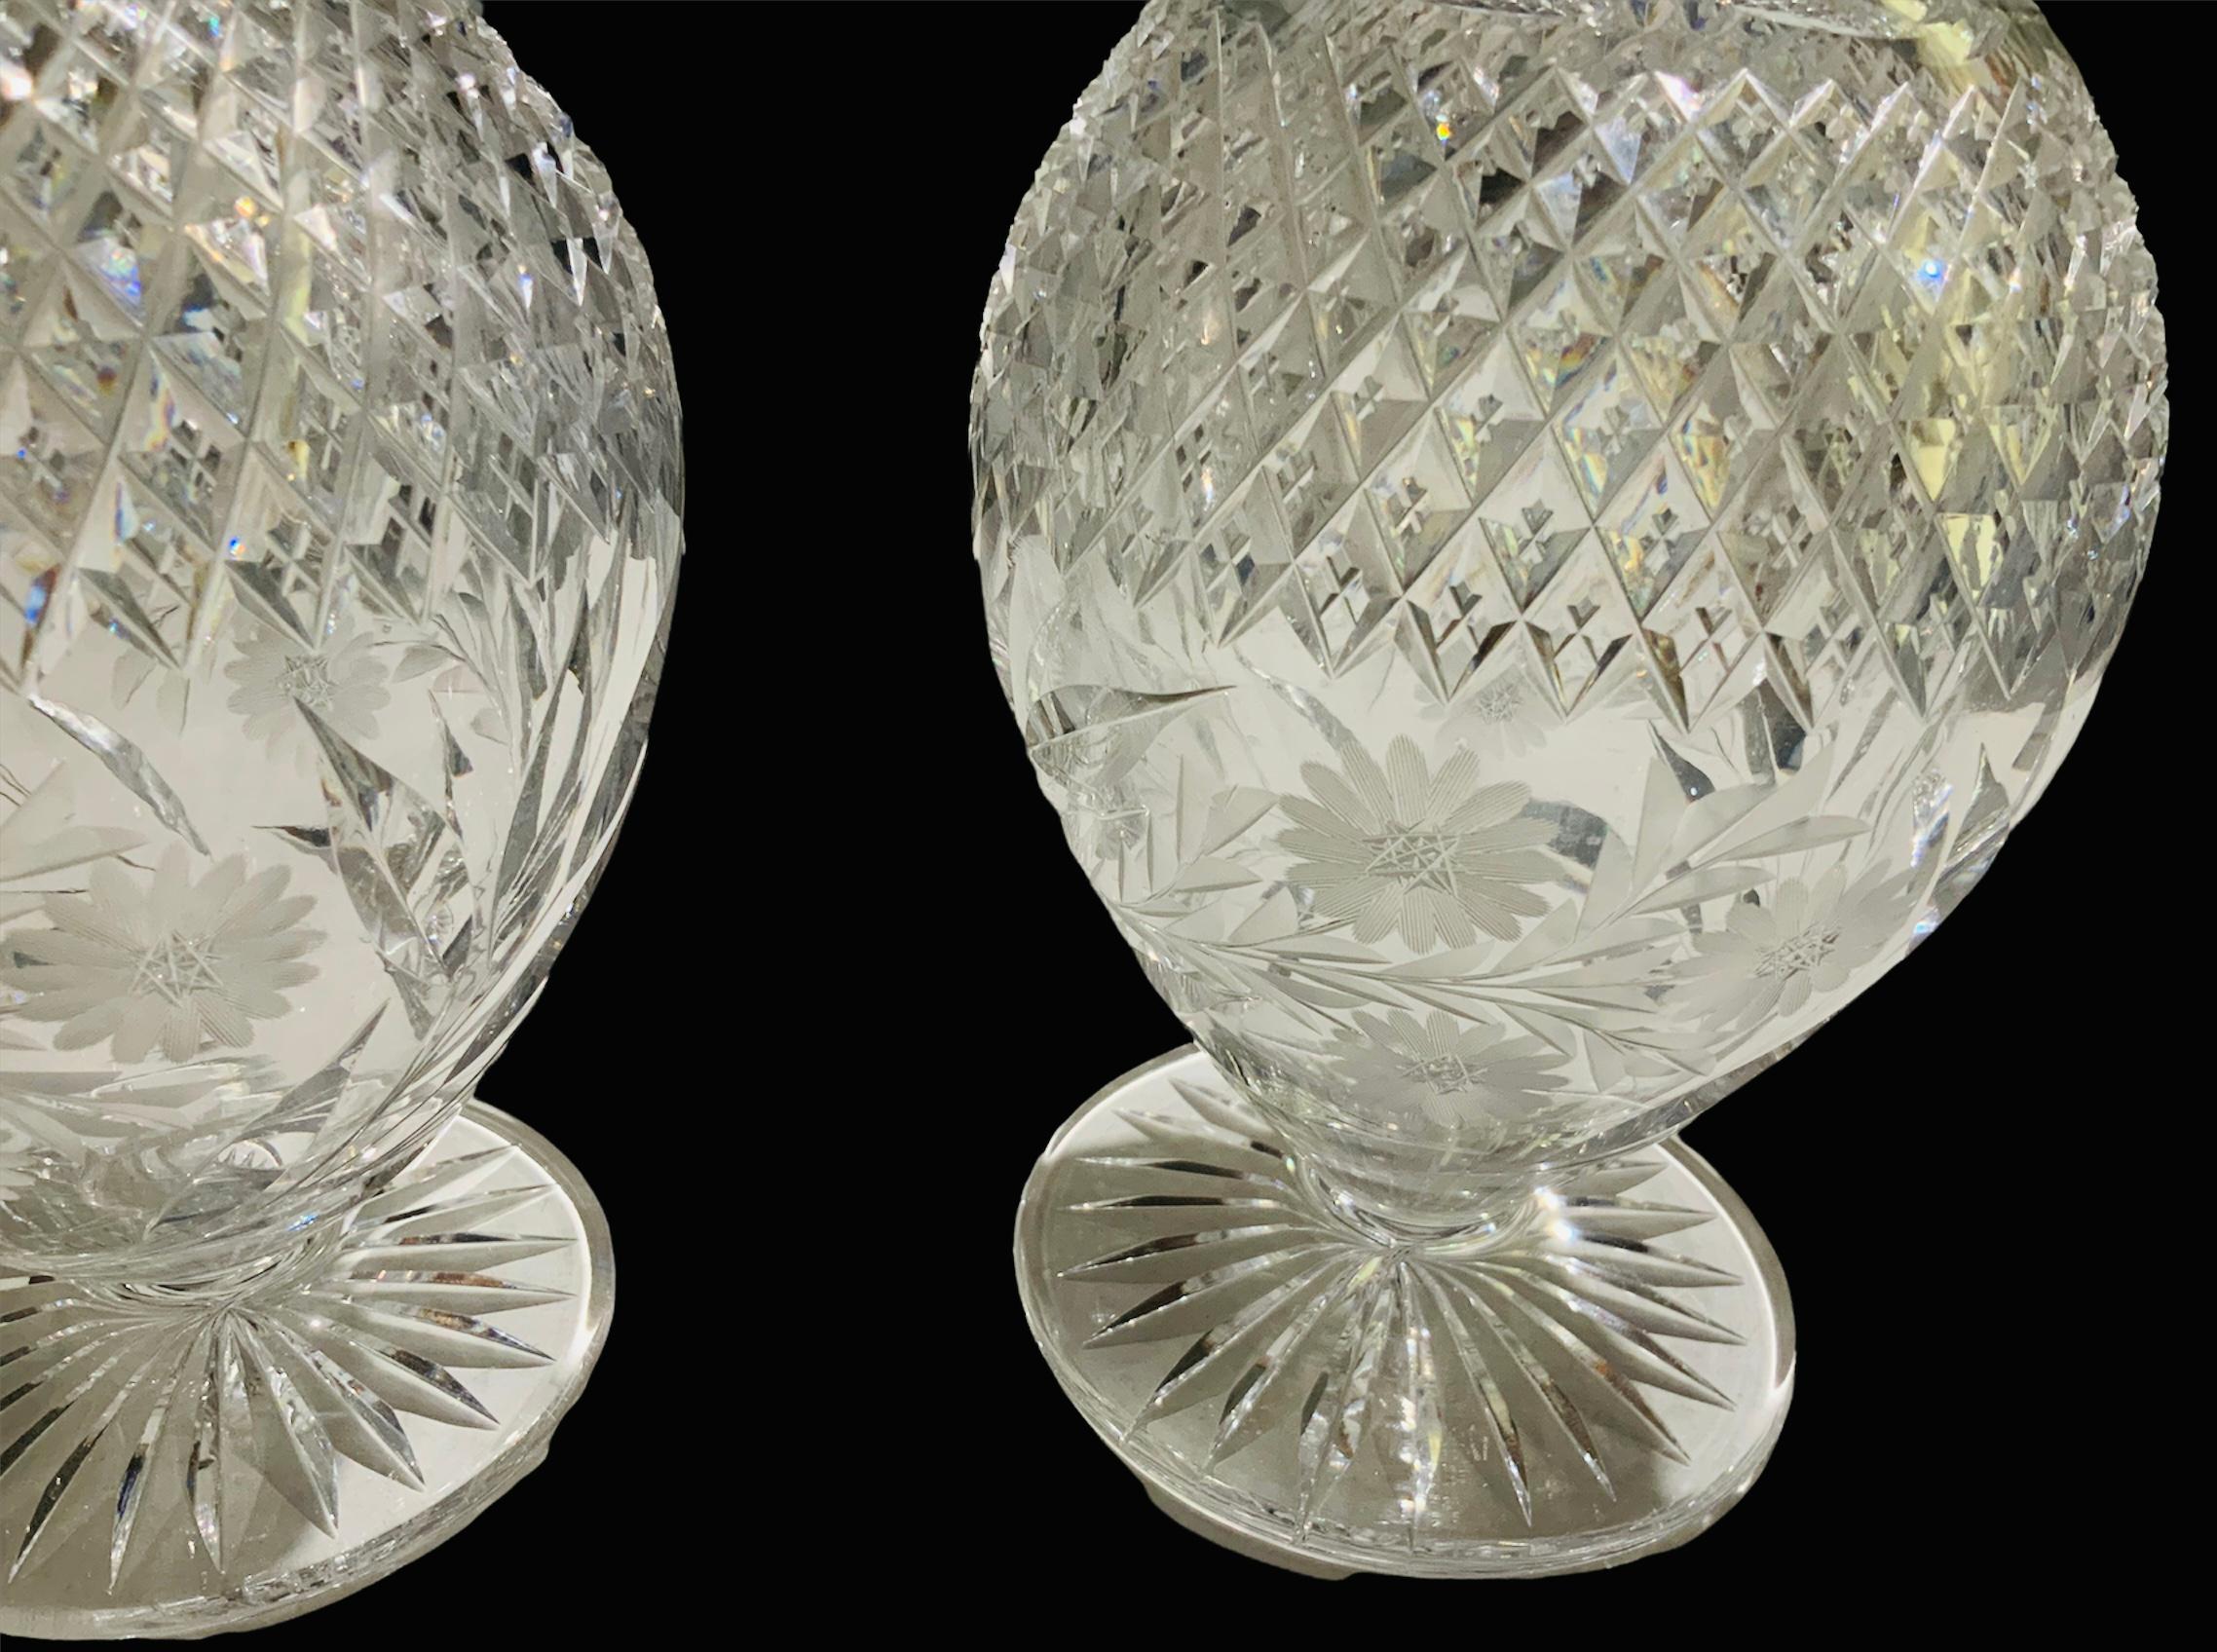 This is a pair of heavy cut clear crystal decanters. They have a long neck with a bulbous shaped body. Their neck is adorned with the knotched prism pattern. The upper body is highlighted with a diamond pattern cut and below it, there are an etched